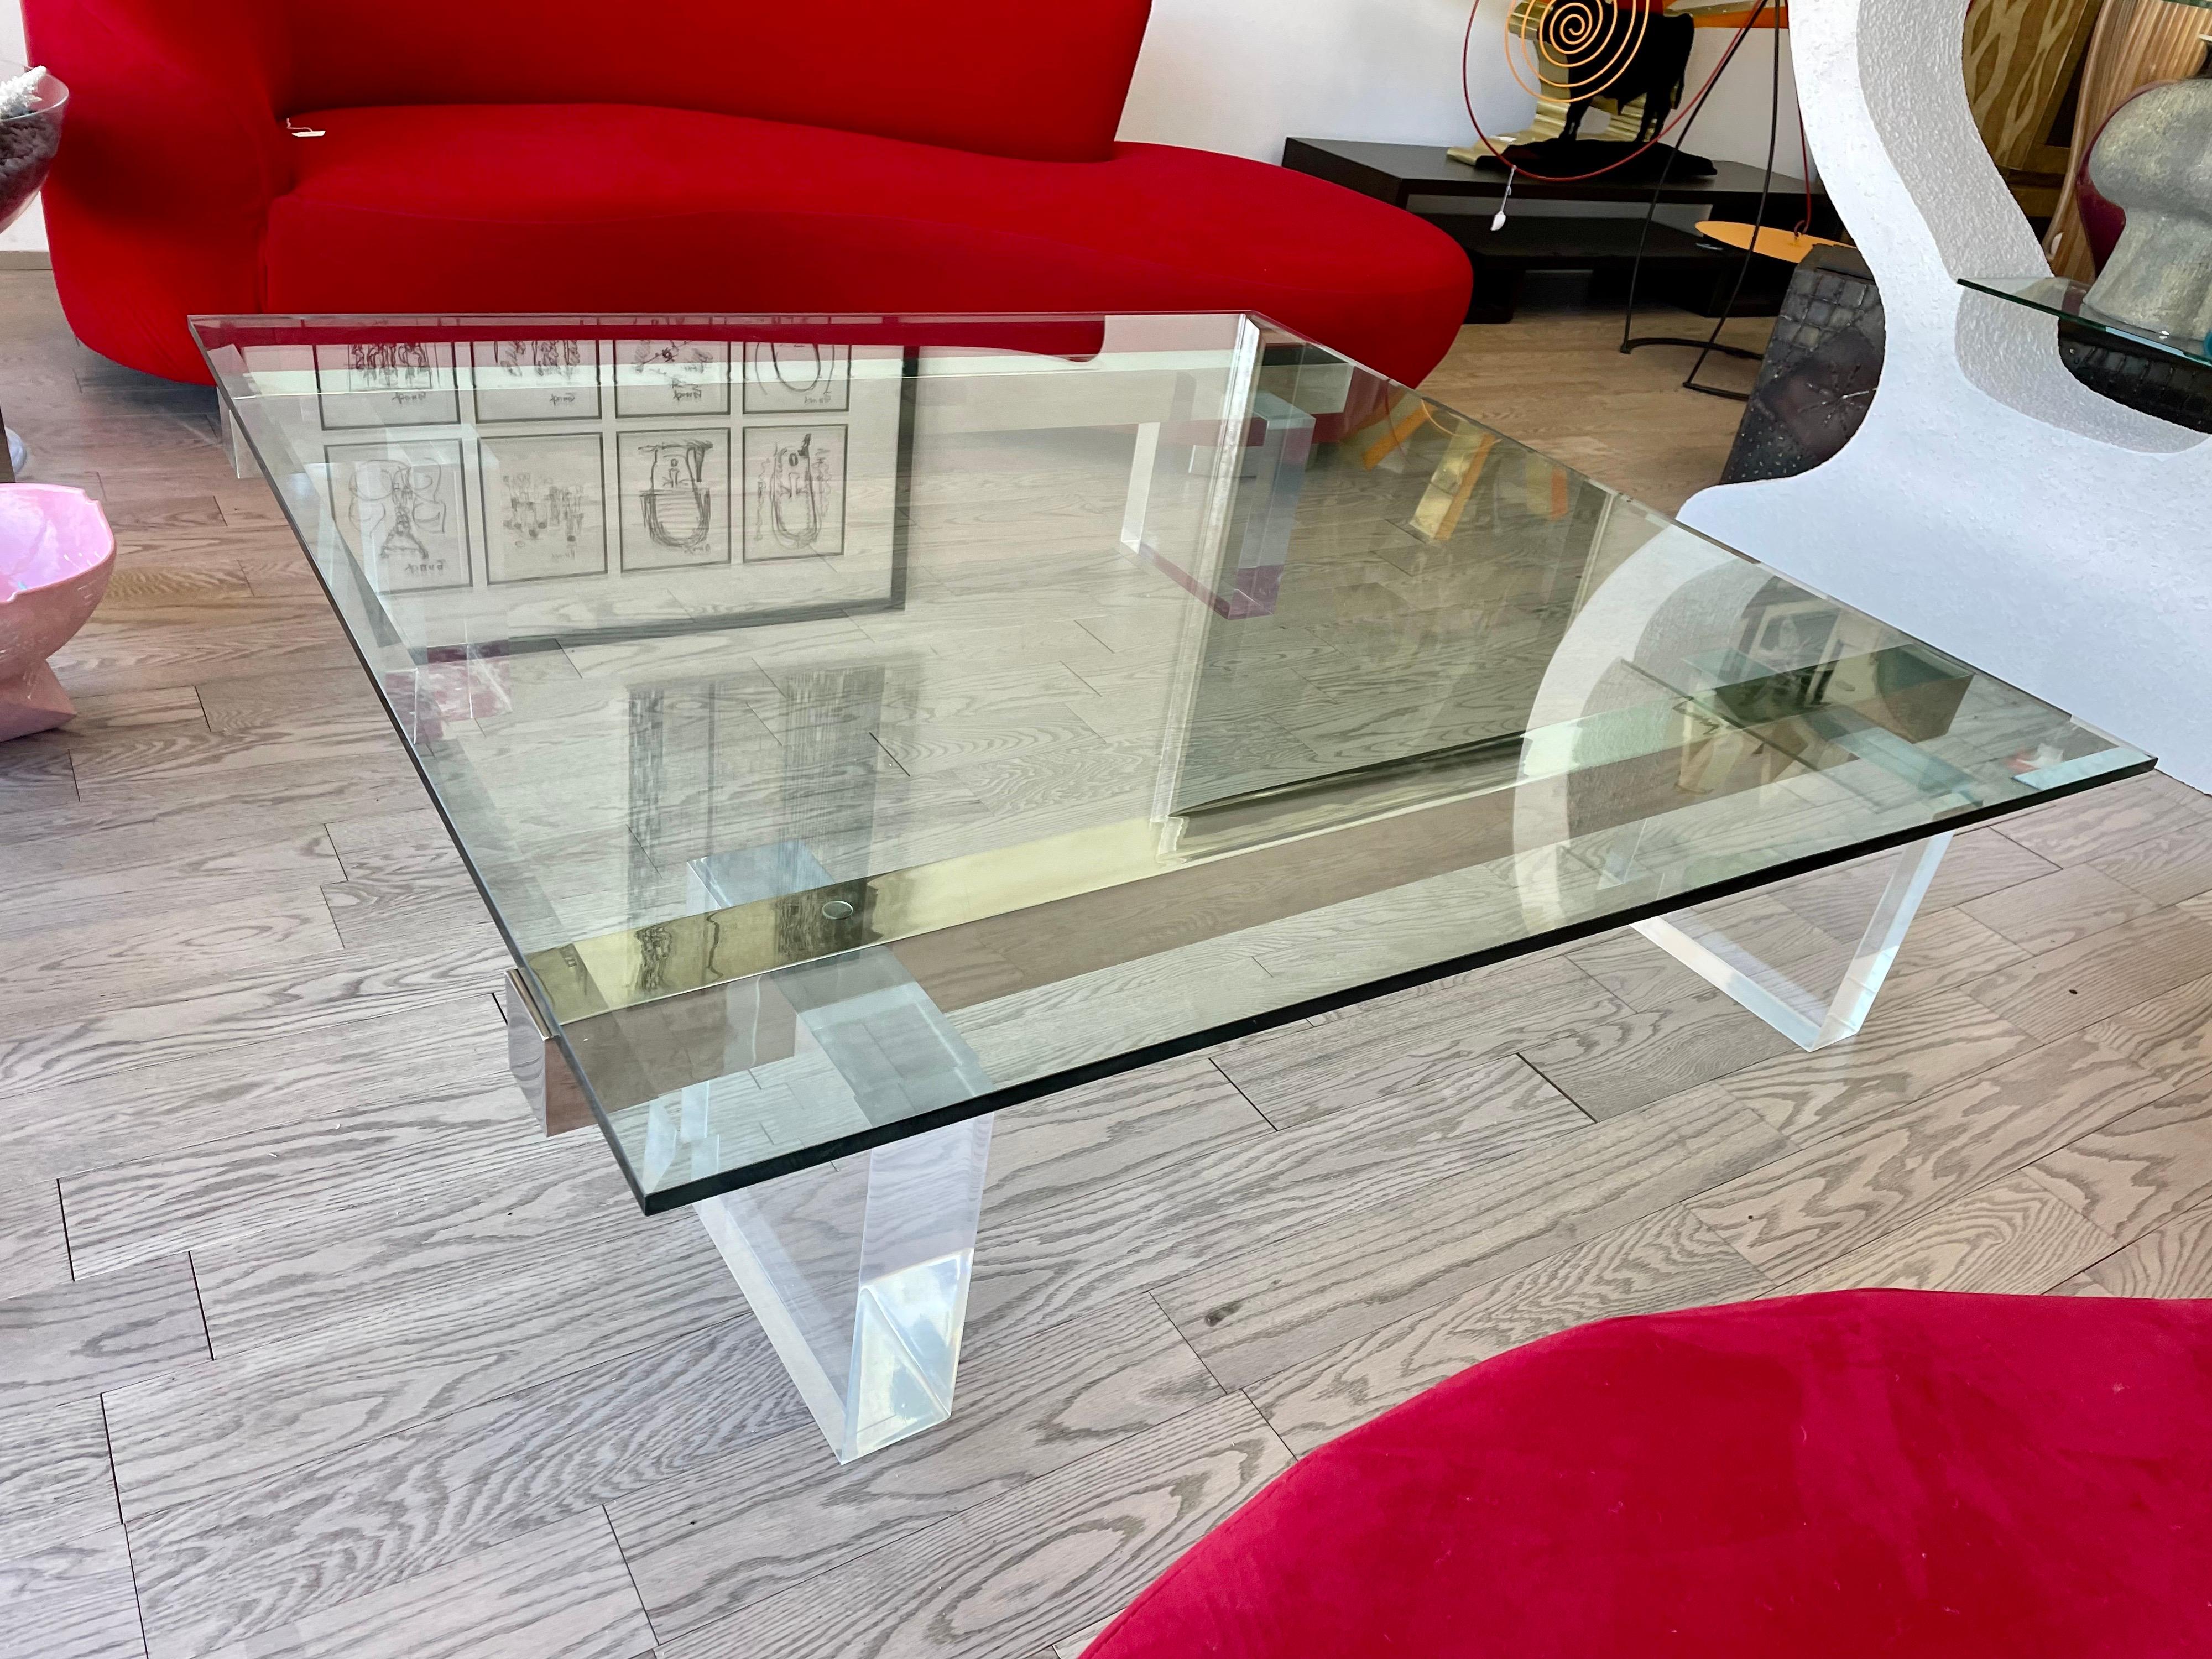 Very stylish large 1980s lucite coffee table in very good condition.
The base of this coffee table is composed by four thick lucite pedestals and two stainless steel bars resting on top.
The glass top is 3/4 of an inch thick with few hairlines